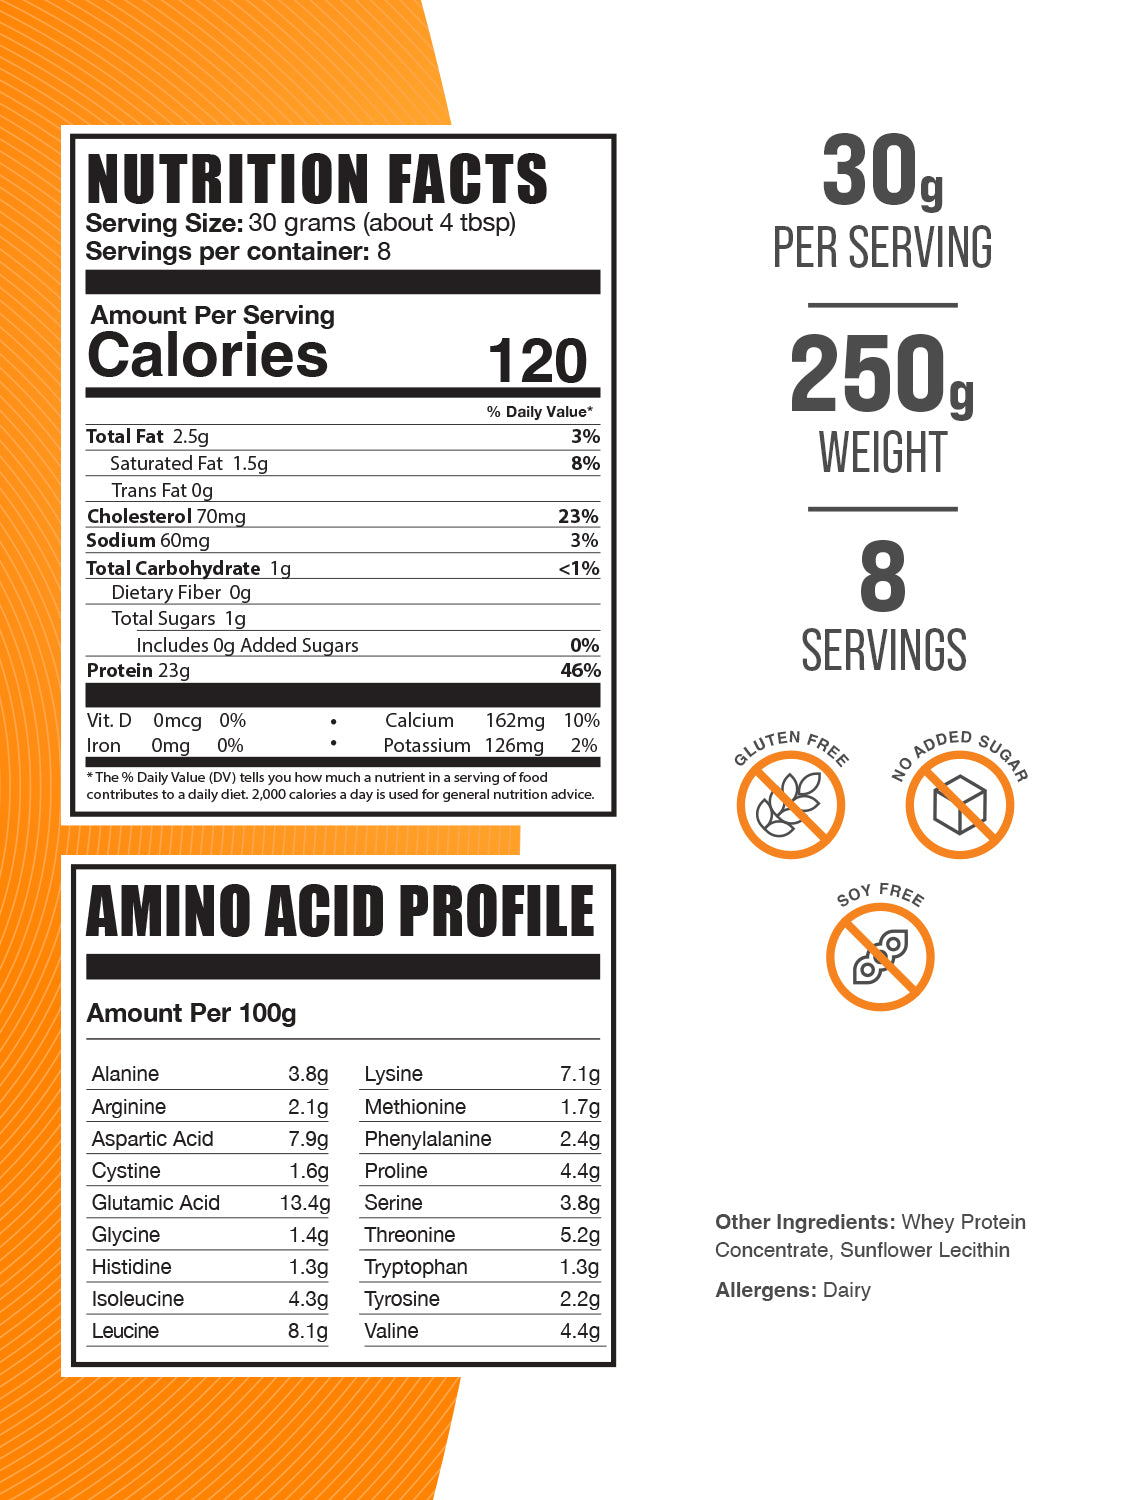 whey protein concentrate 250g label